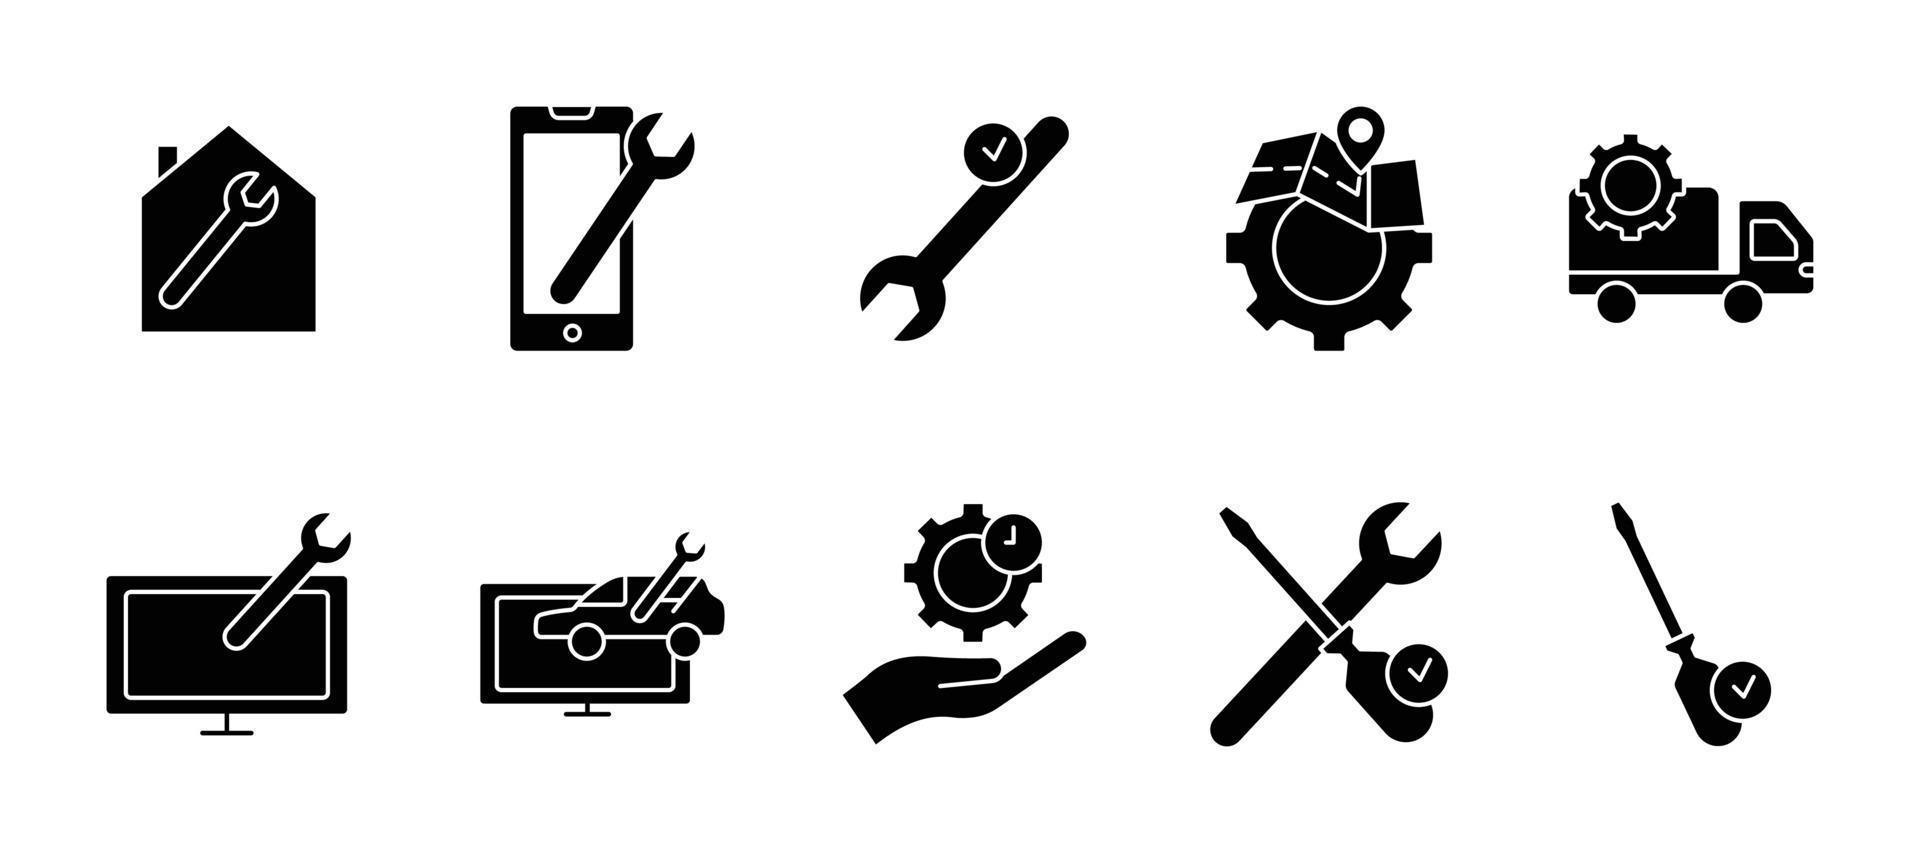 Illustration of icon set related to automotive repair, maintenance. glyph icon style. Simple vector design editable.